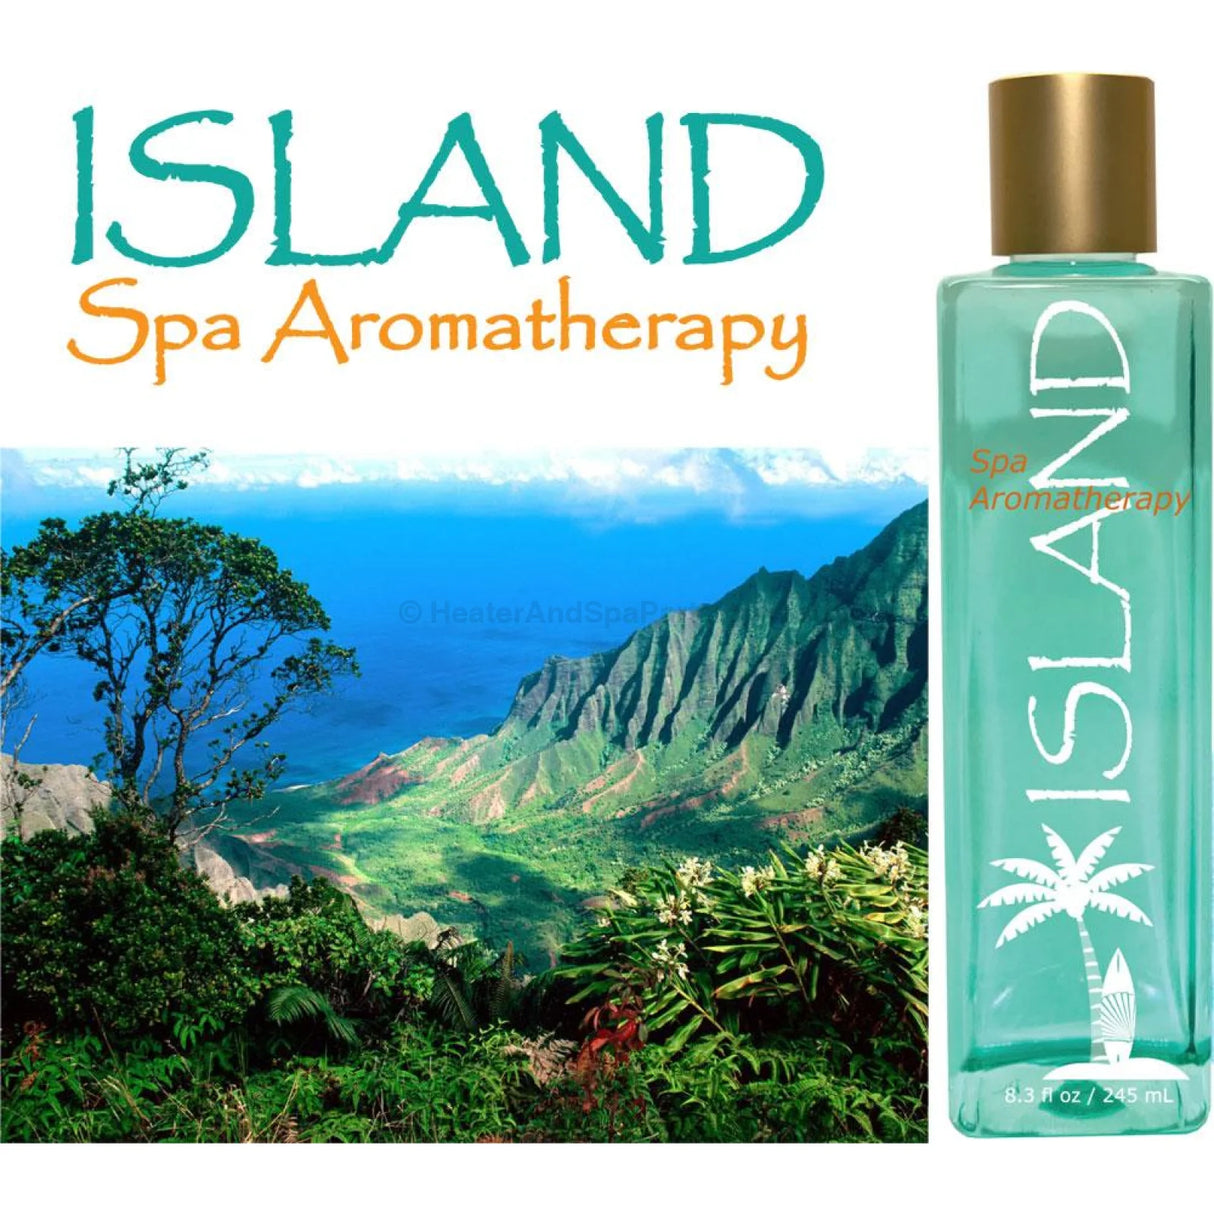 Island Aromatherapy - inSparations - Heater and Spa Parts